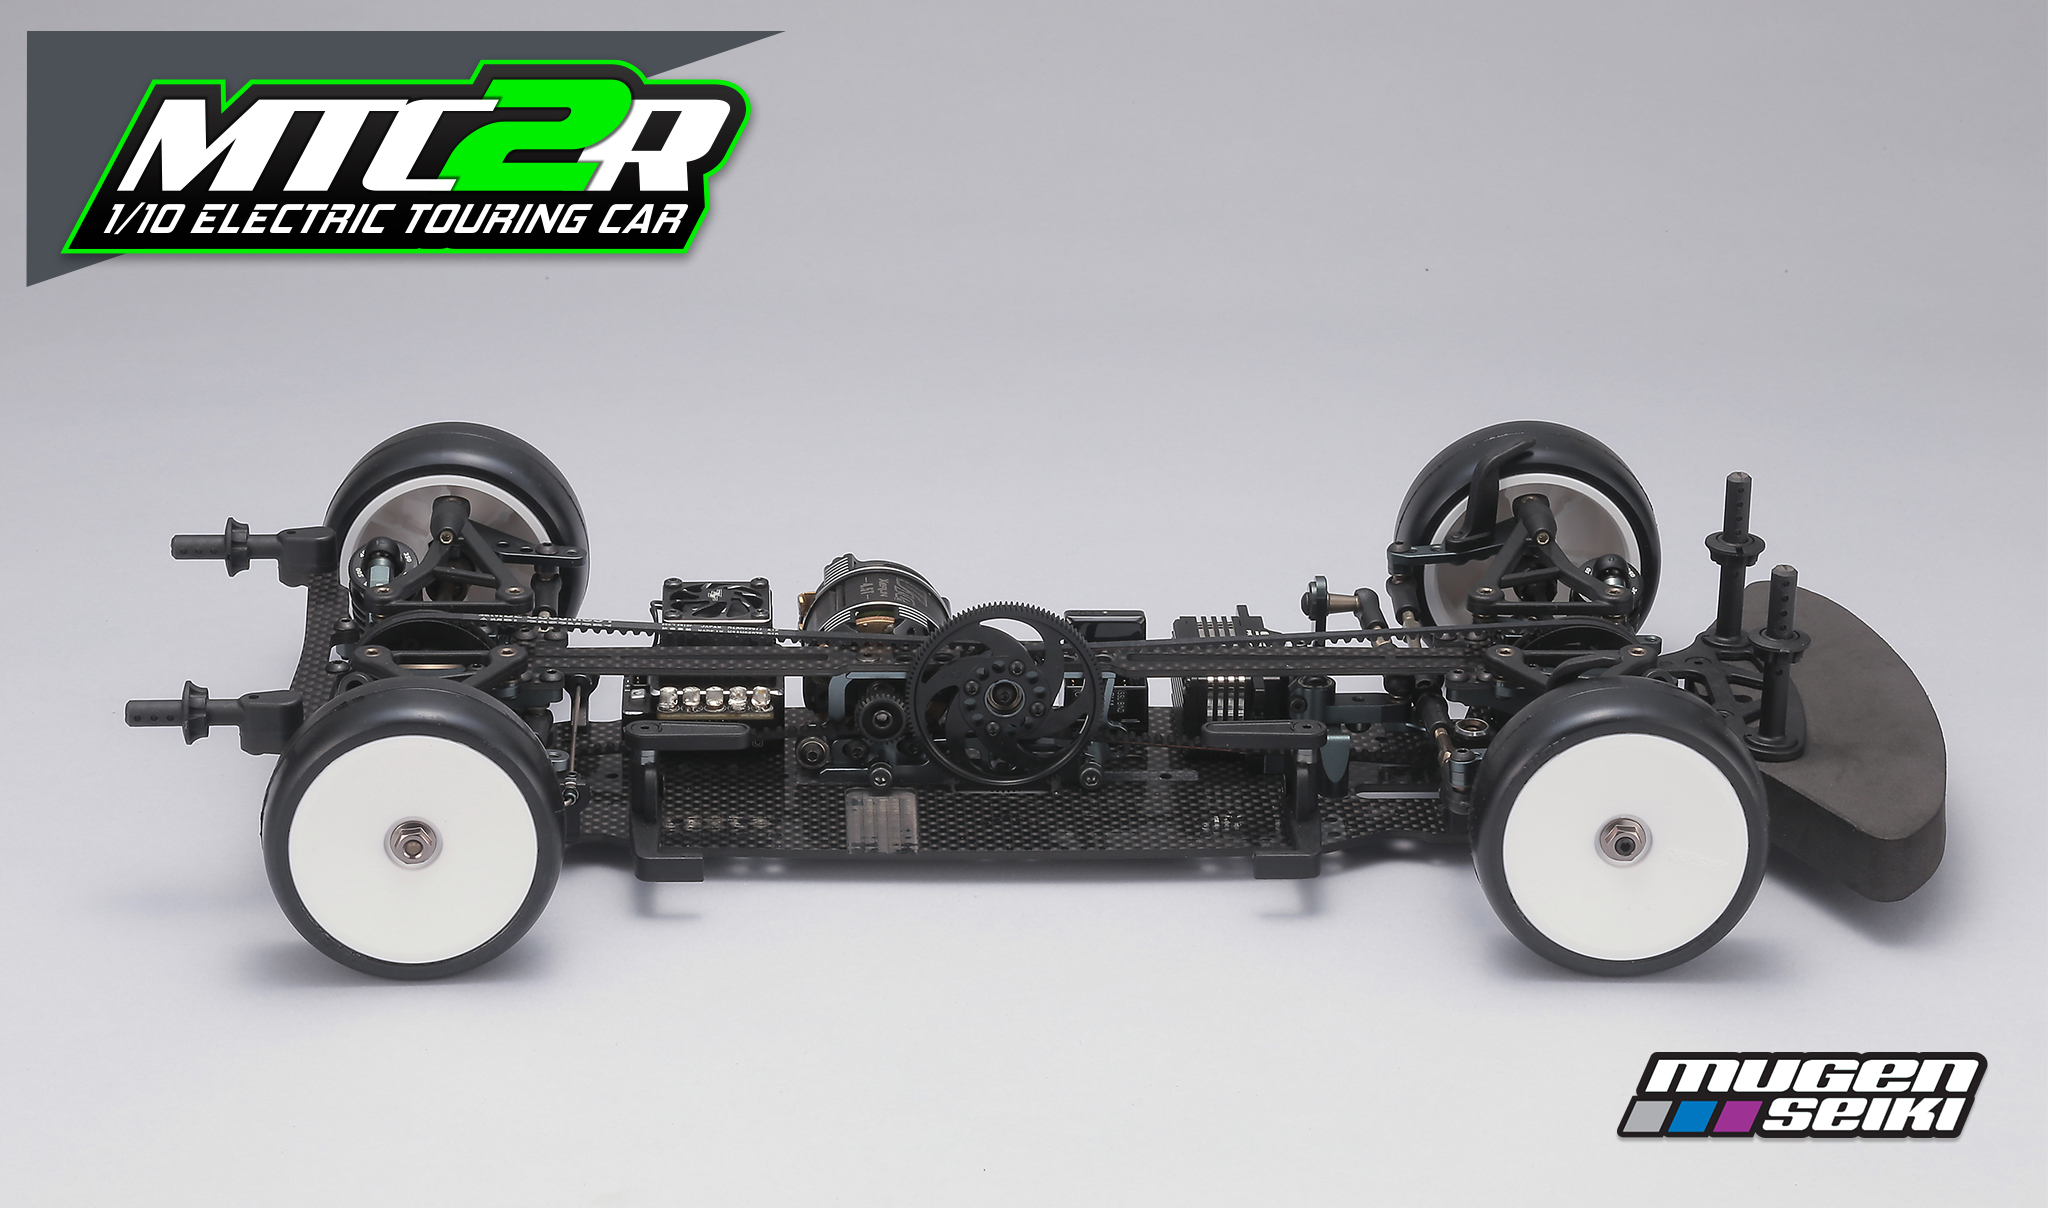 Mugen MTC2R 1/10 Competition Electric Touring Car